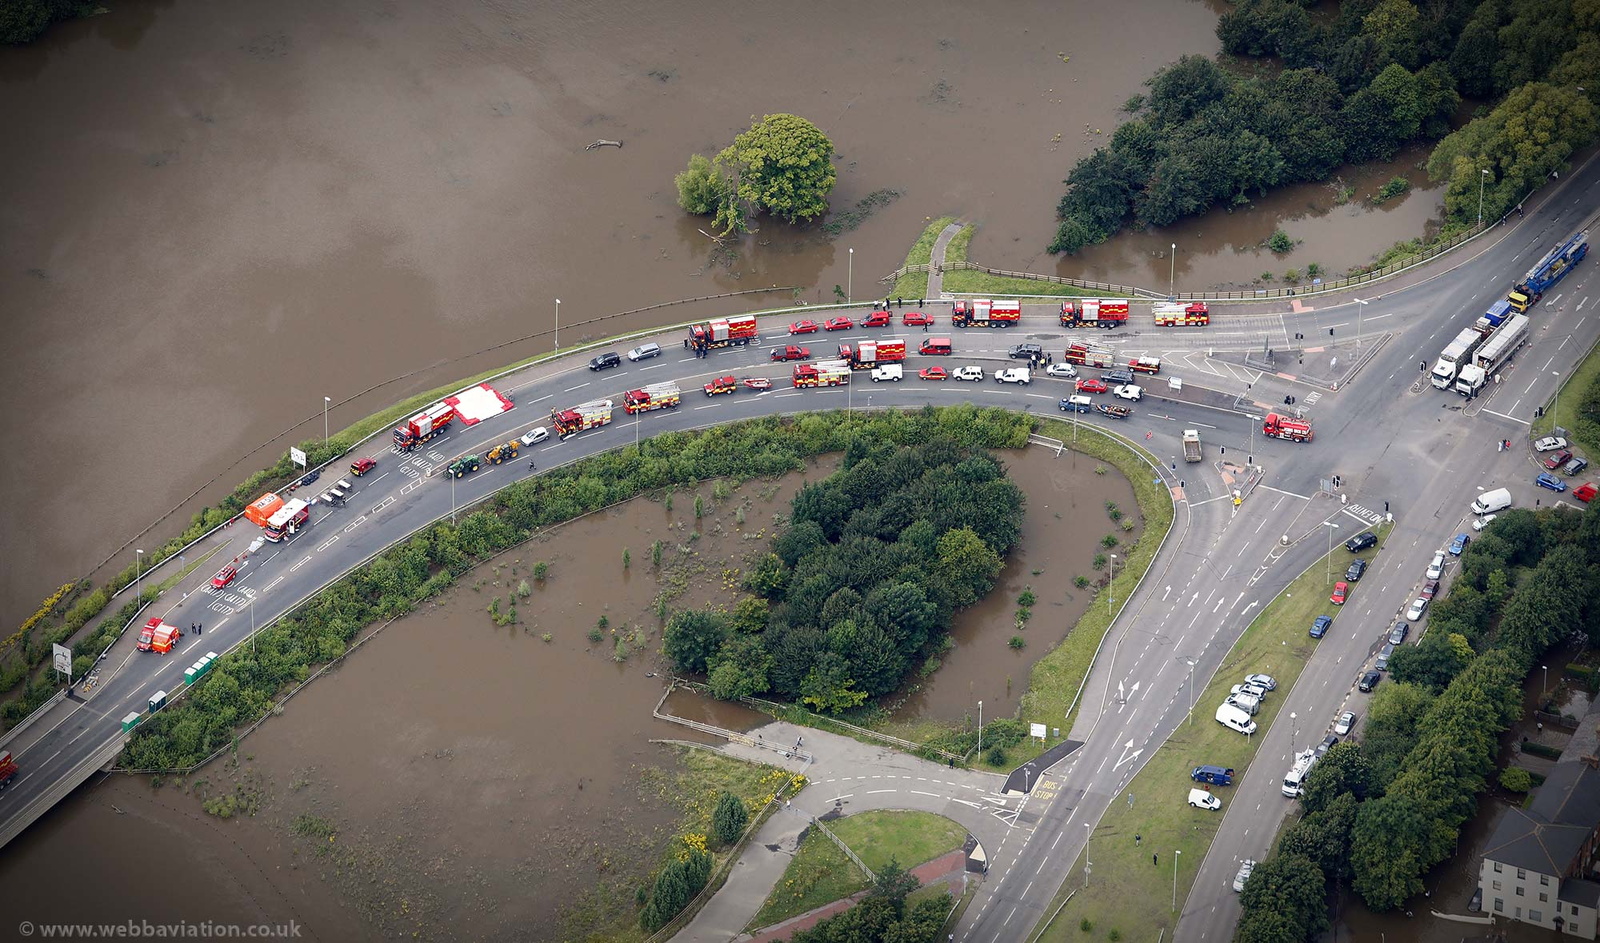  the gathering of Emergency Services in Gloucester  during the great River Severn floods of 2007 from the air